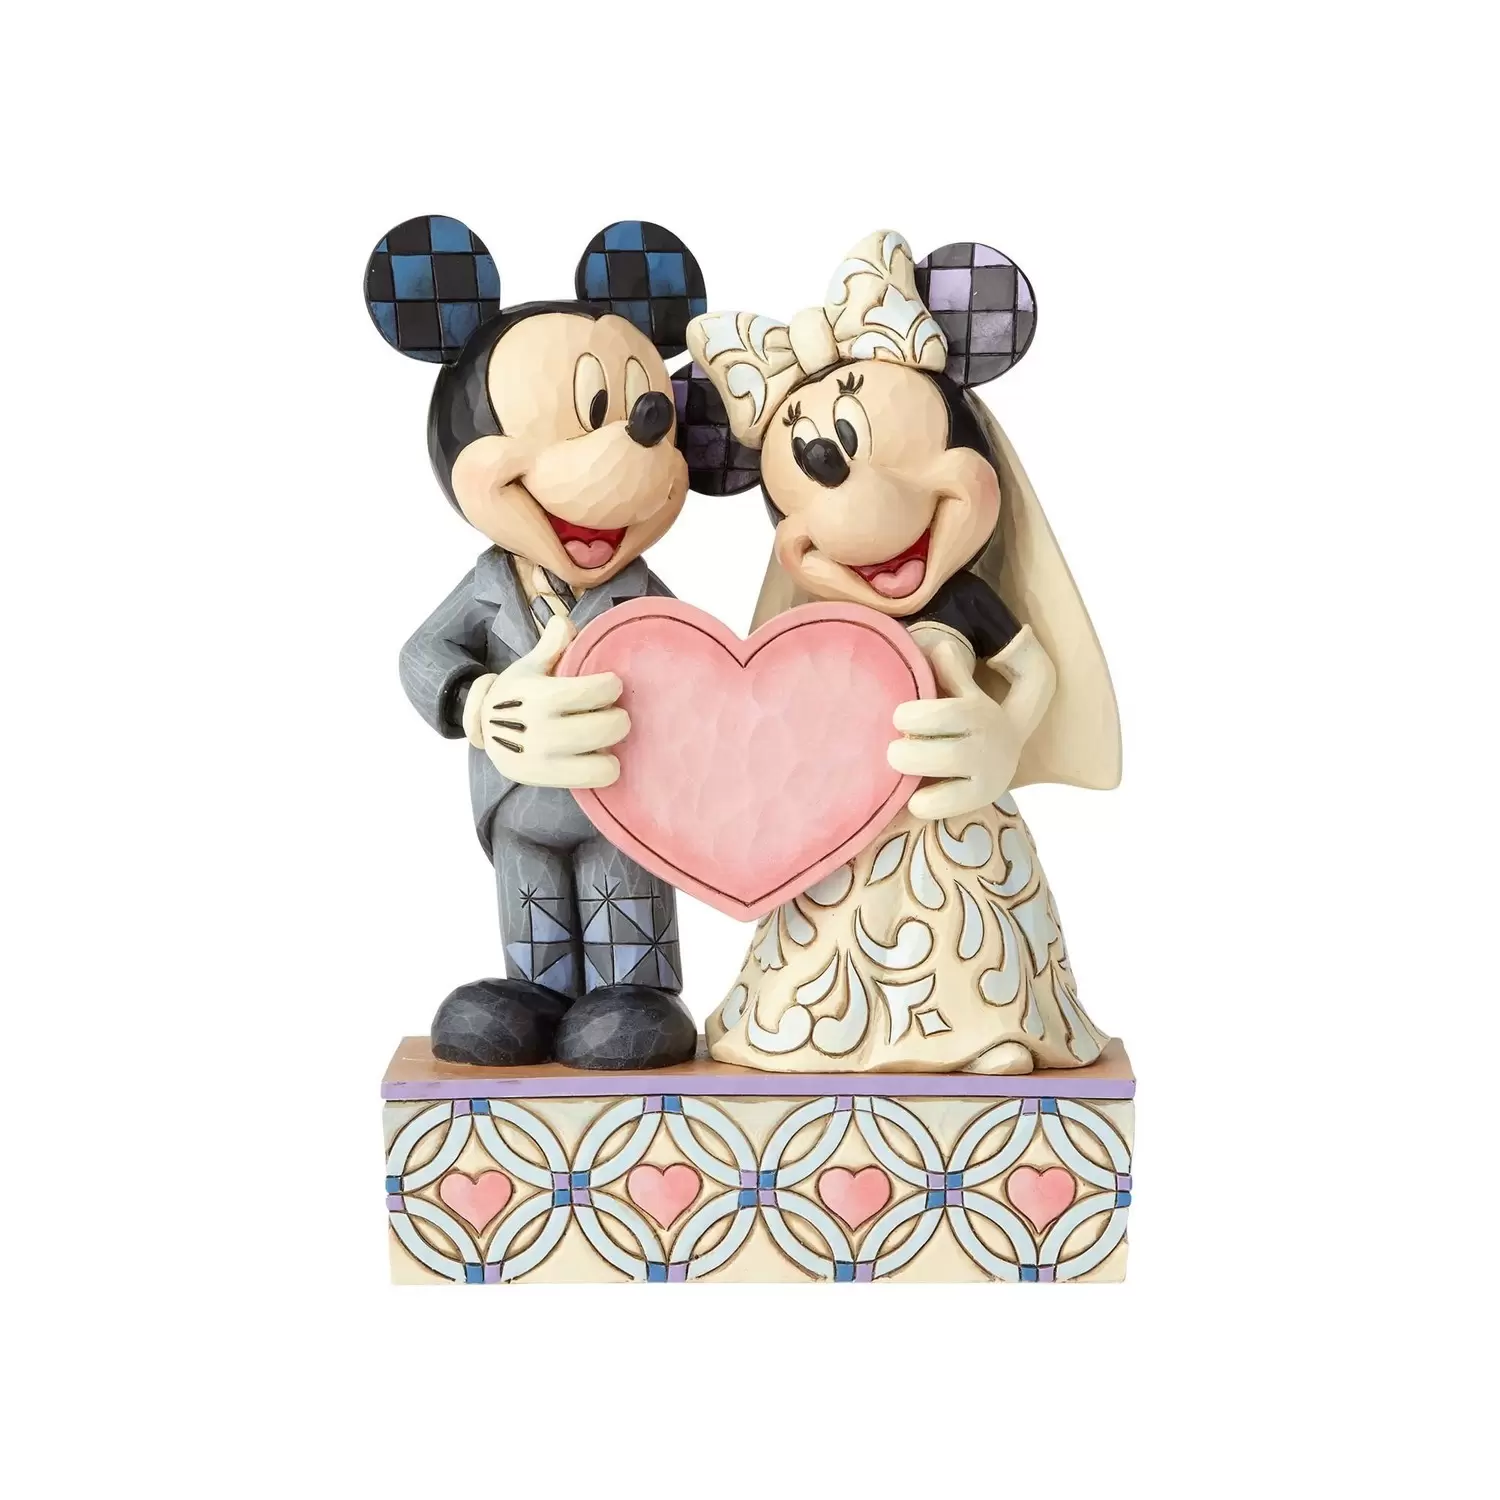 Disney Traditions by Jim Shore - Two Souls, One Heart - Wedding Mickey and Minnie Personalization